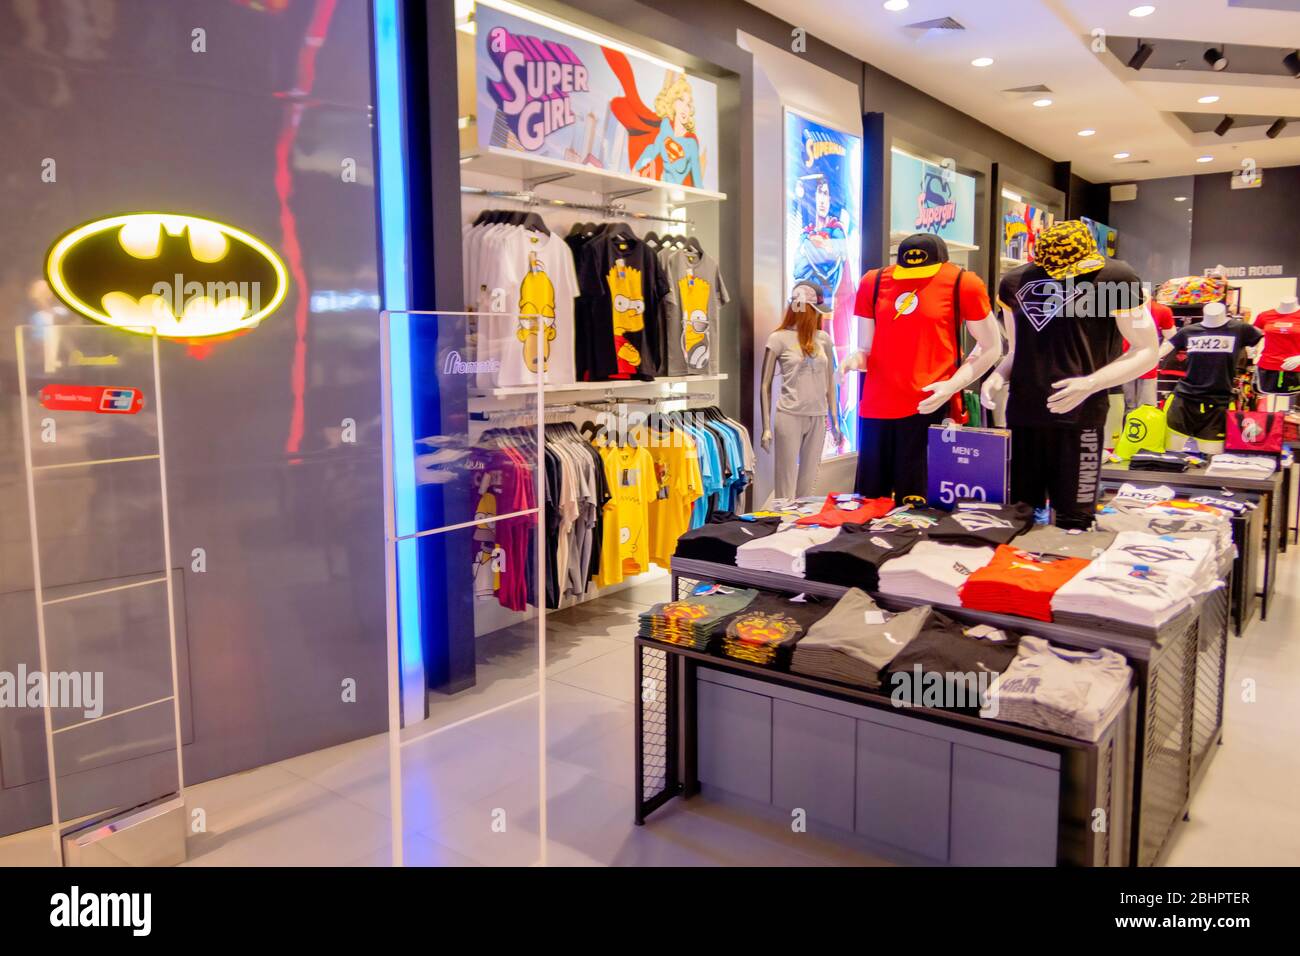 Many styles of DC clothing store with yellow emblem at the front of store in Blueport department store Hua Hin, Thailand MArch 20, 2019 Stock Photo Alamy